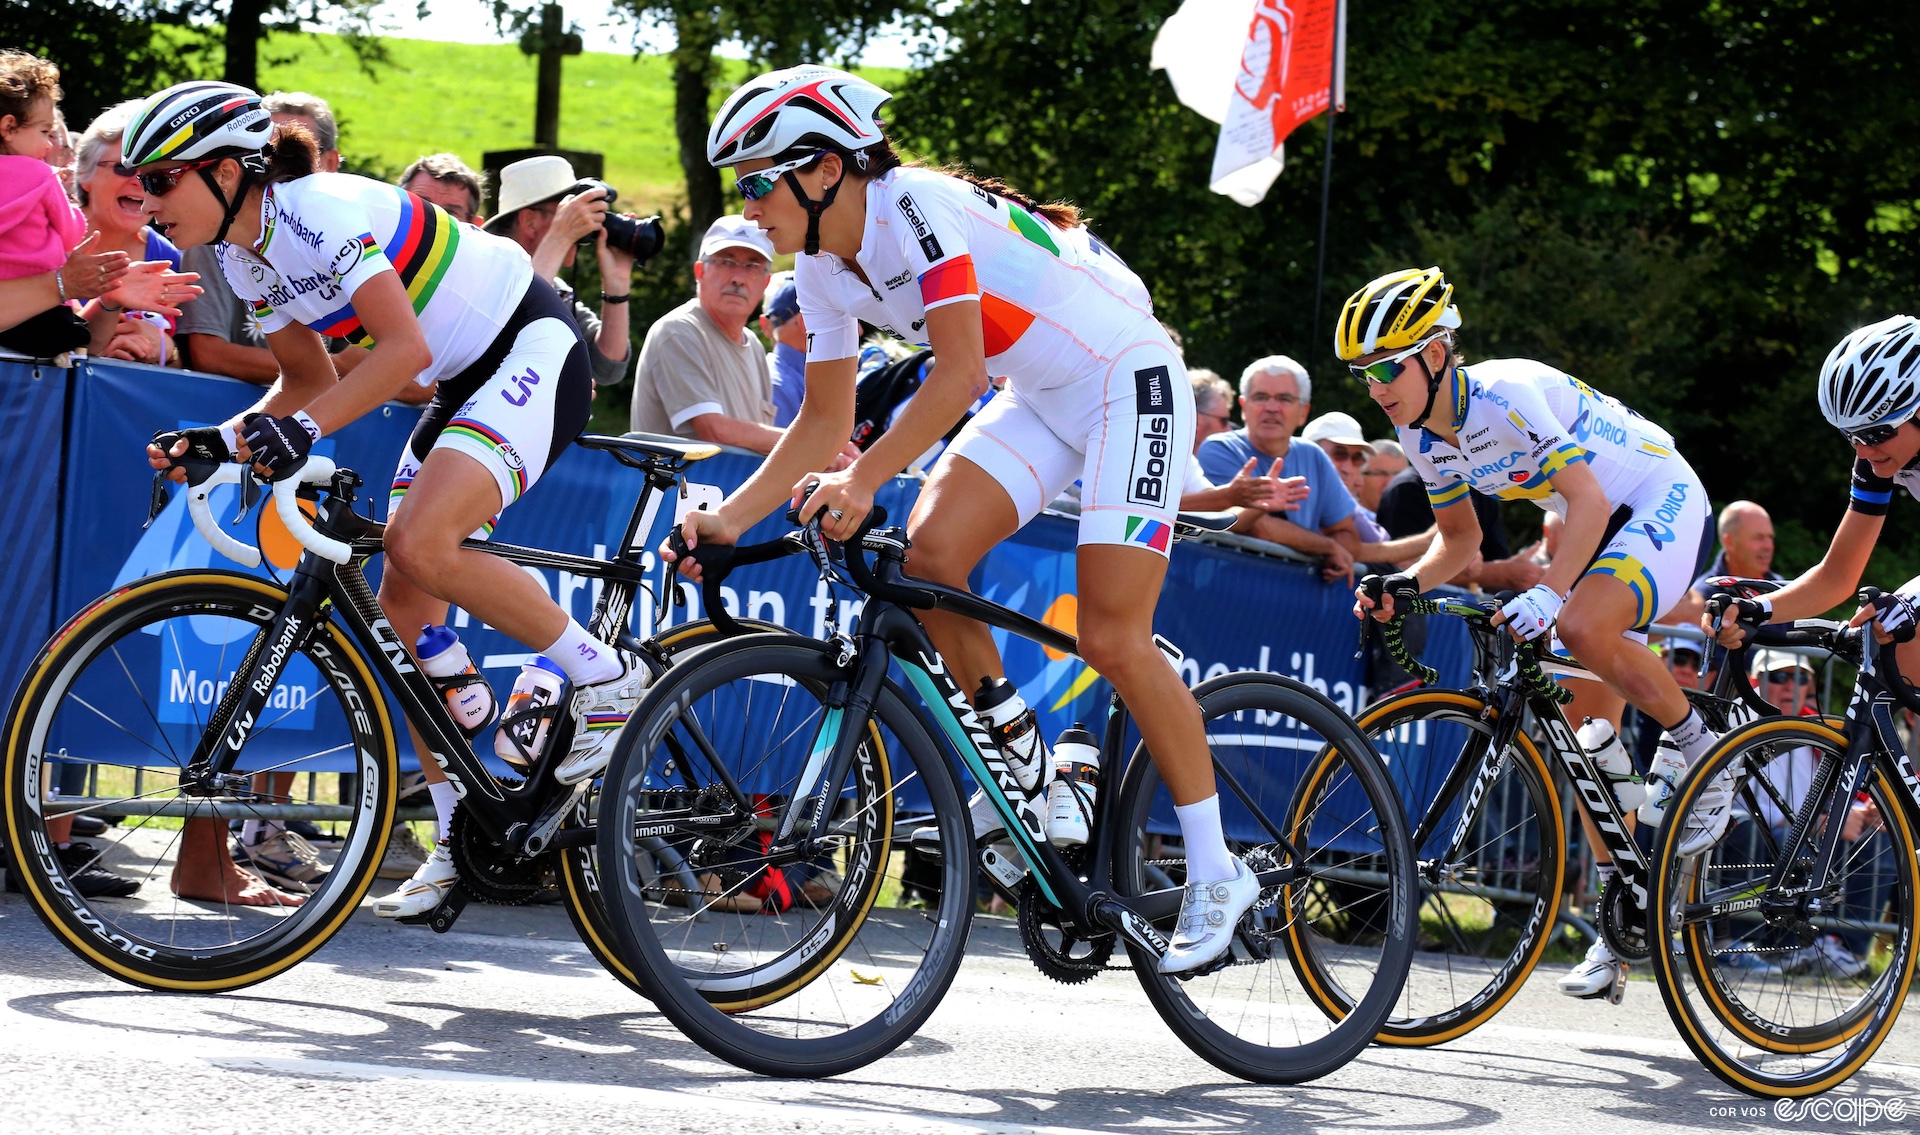 A group of women race bikes up a hill, one wears white bib shorts